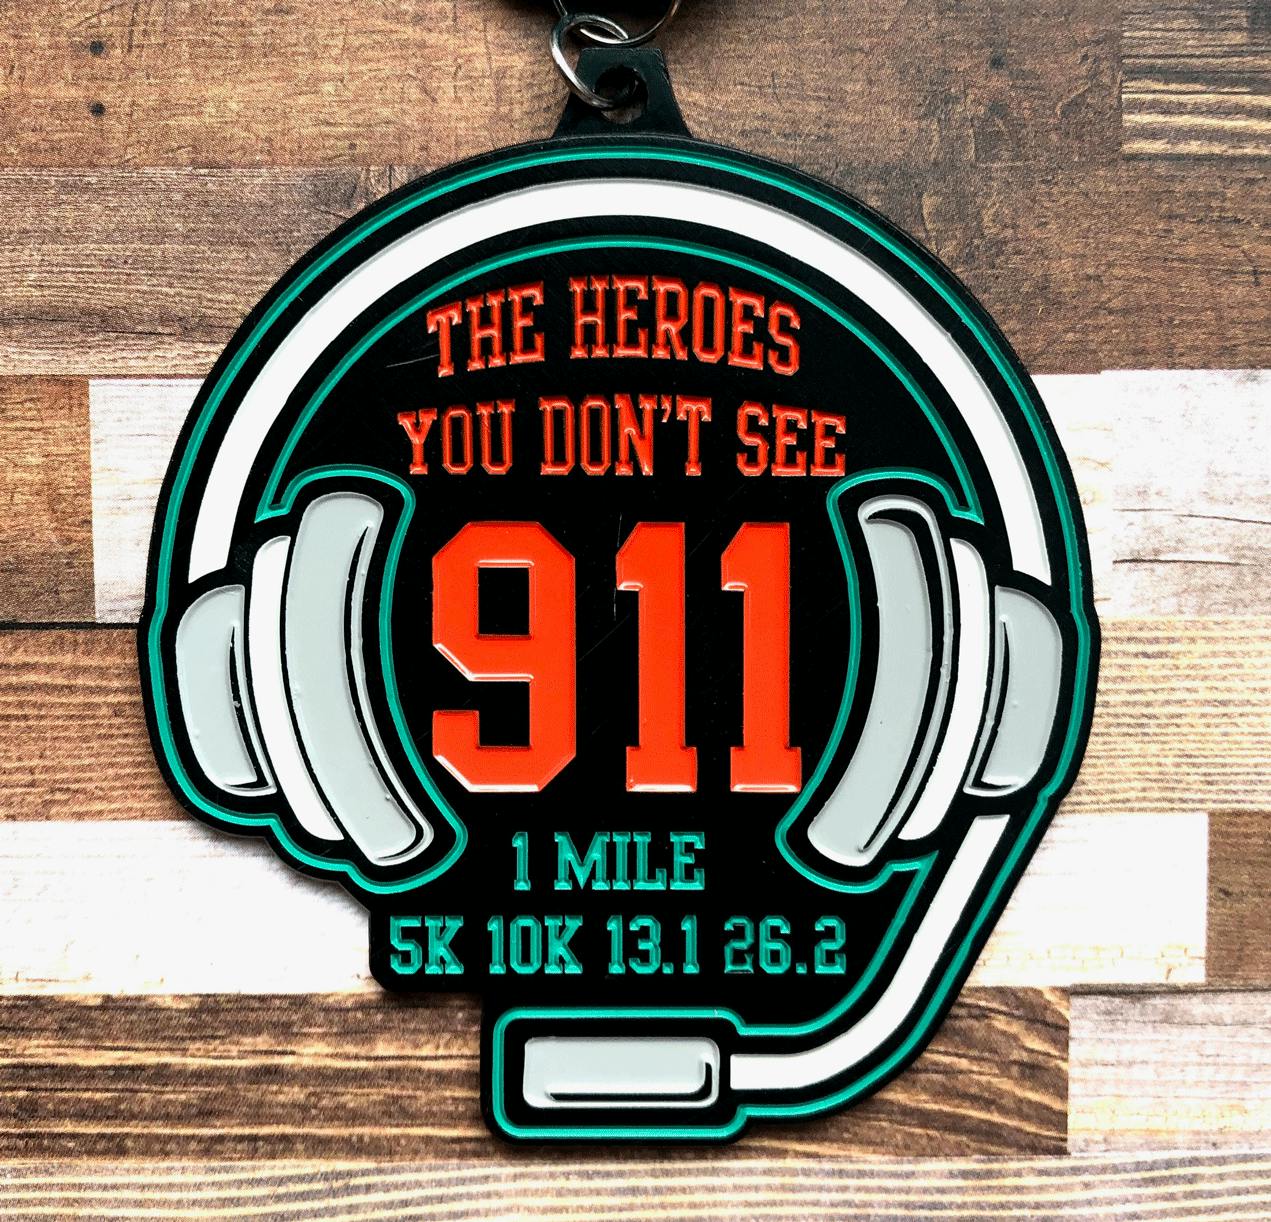 The Heroes You Don't See 1 M 5K 10K 13.1 26.2 -Salem